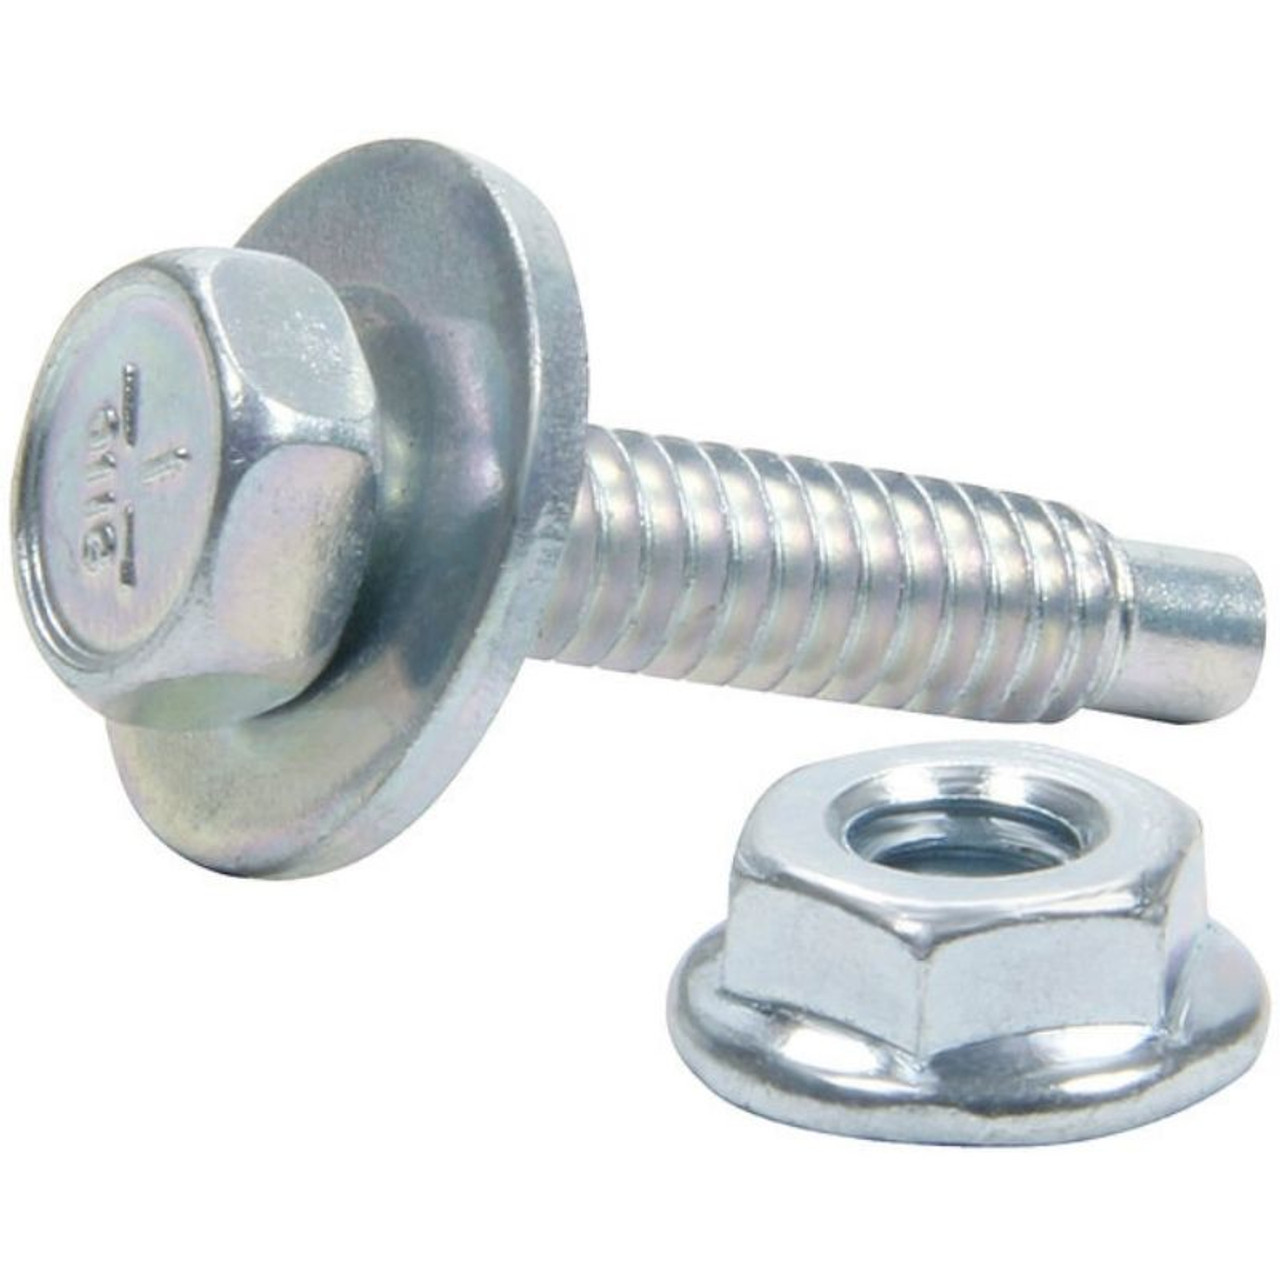 Body Bolt Kit, 1/4-20 in Thread, 1-1/8 in Long, Hex Head, Bolts Nuts  Washers, Steel, Clear Anodized, Set of 50 ALL-18655-50